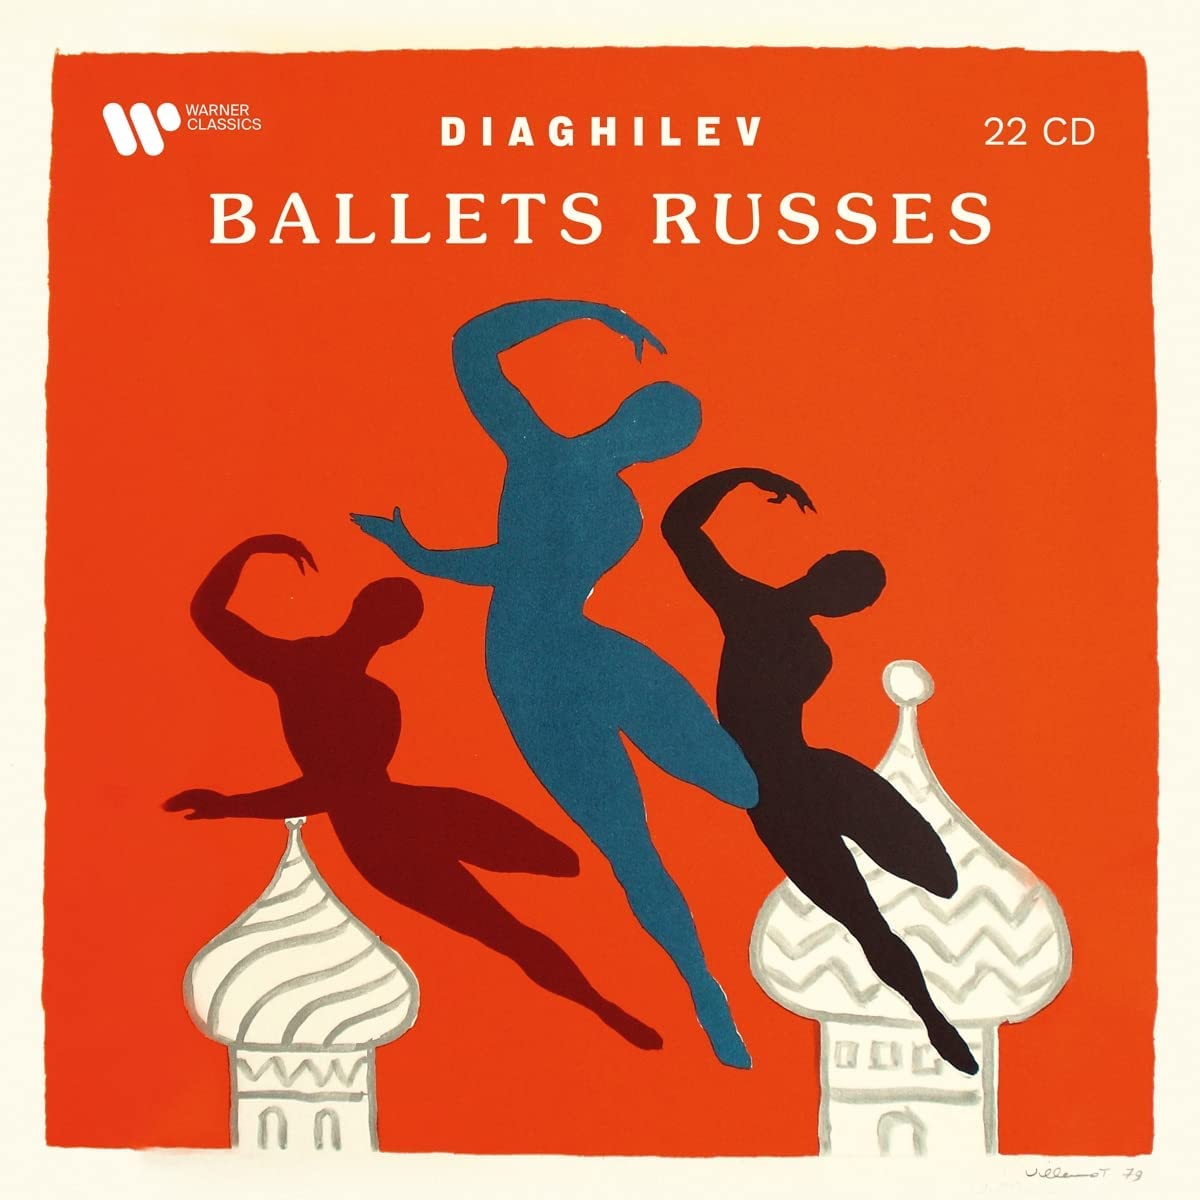 Diaghilev ballets russes